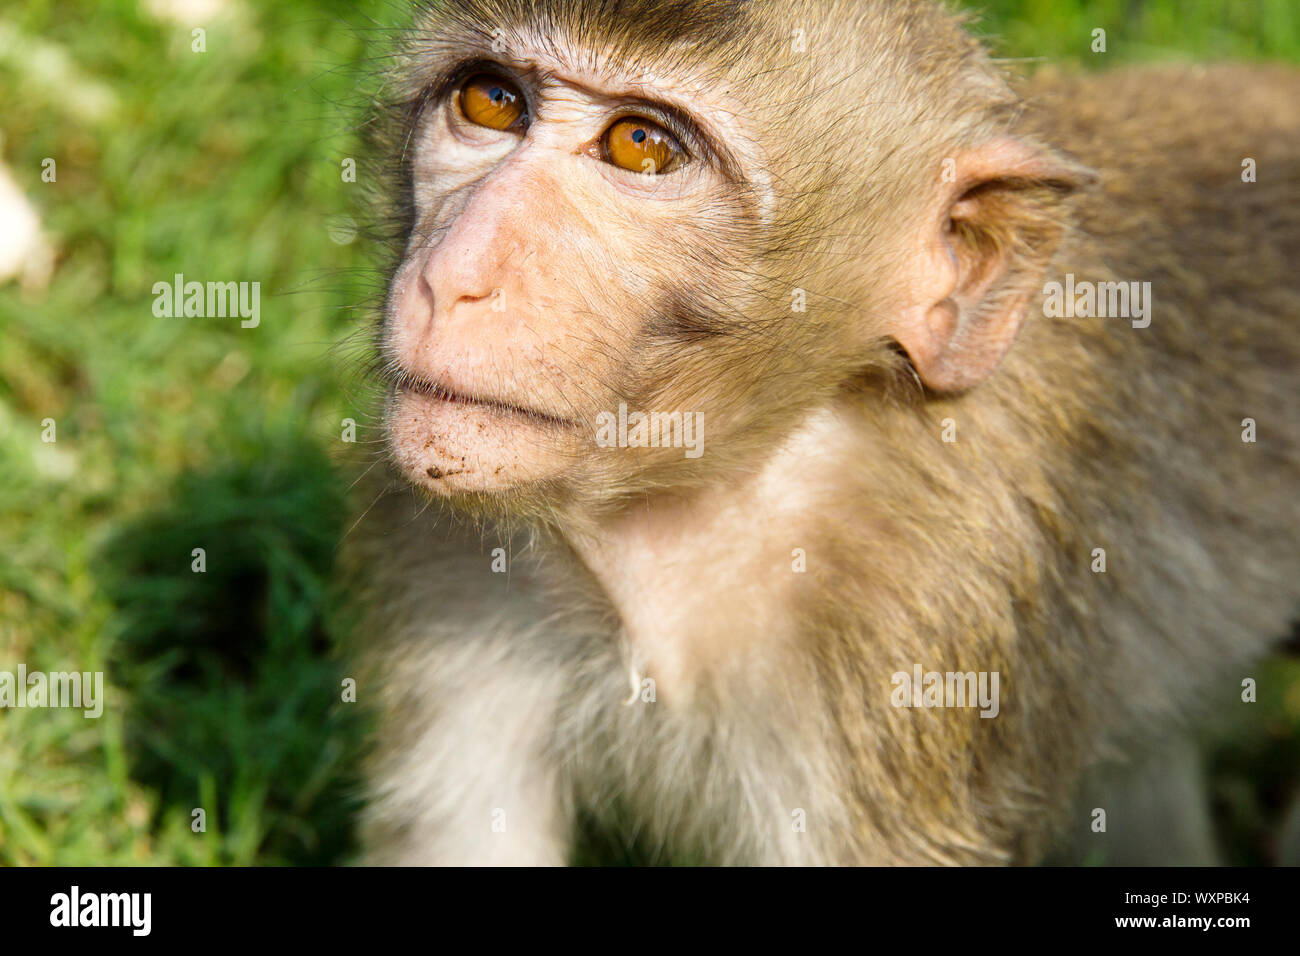 portrait of Long-tailed macaque Stock Photo